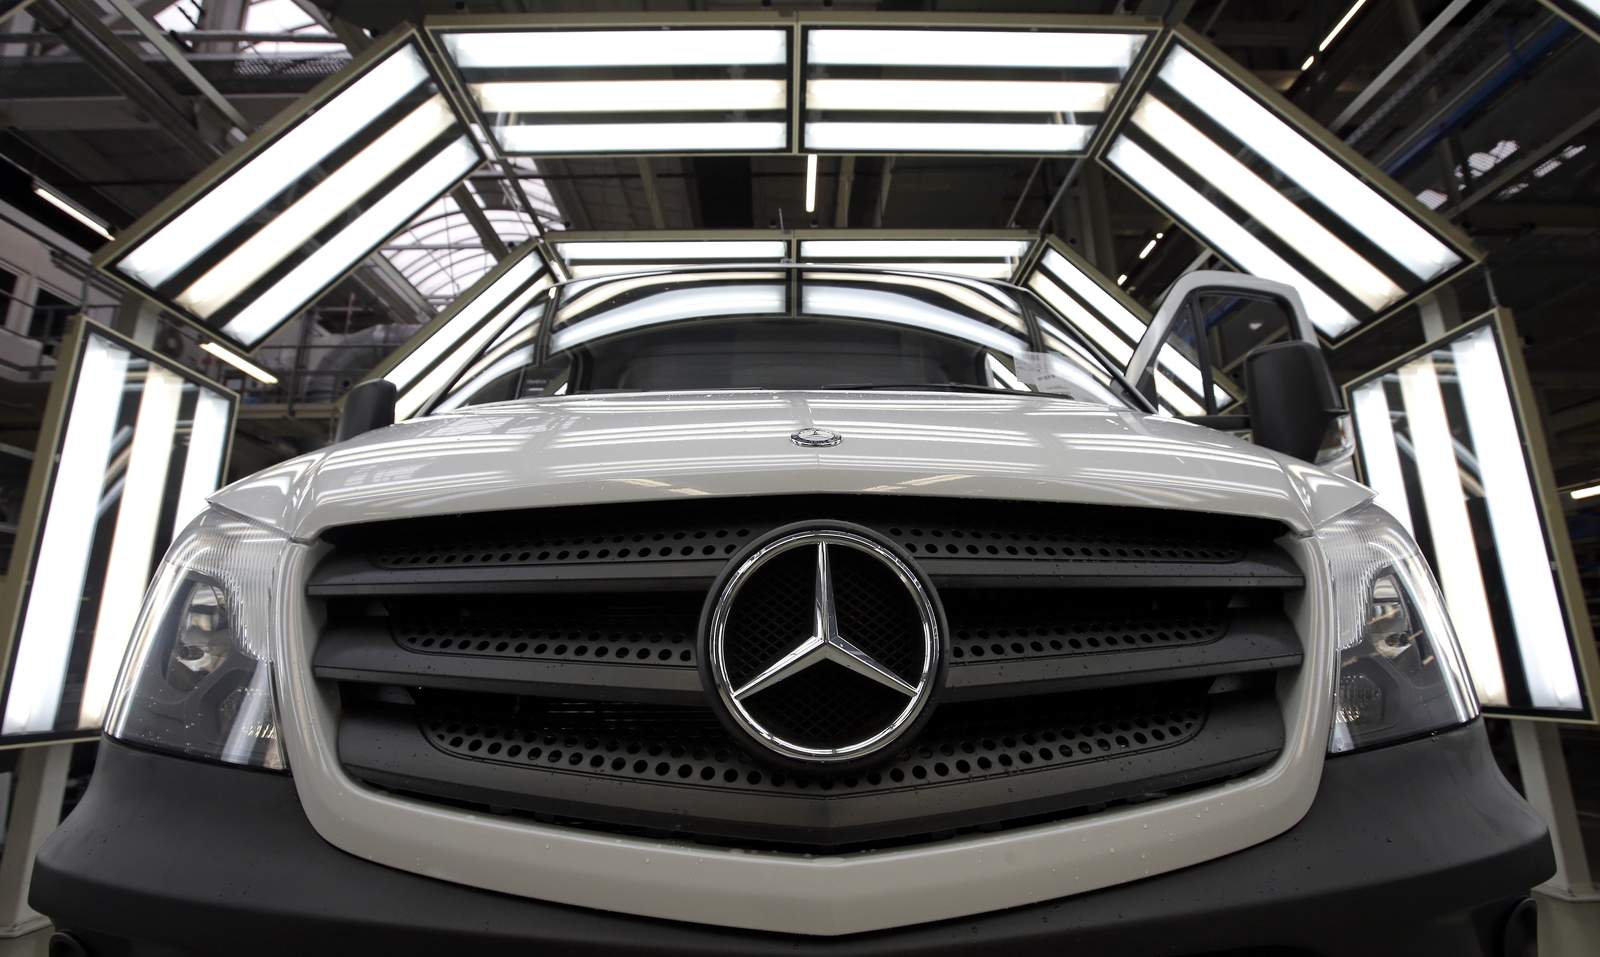 Daimler AG to pay $1.5B to settle emissions cheating probes